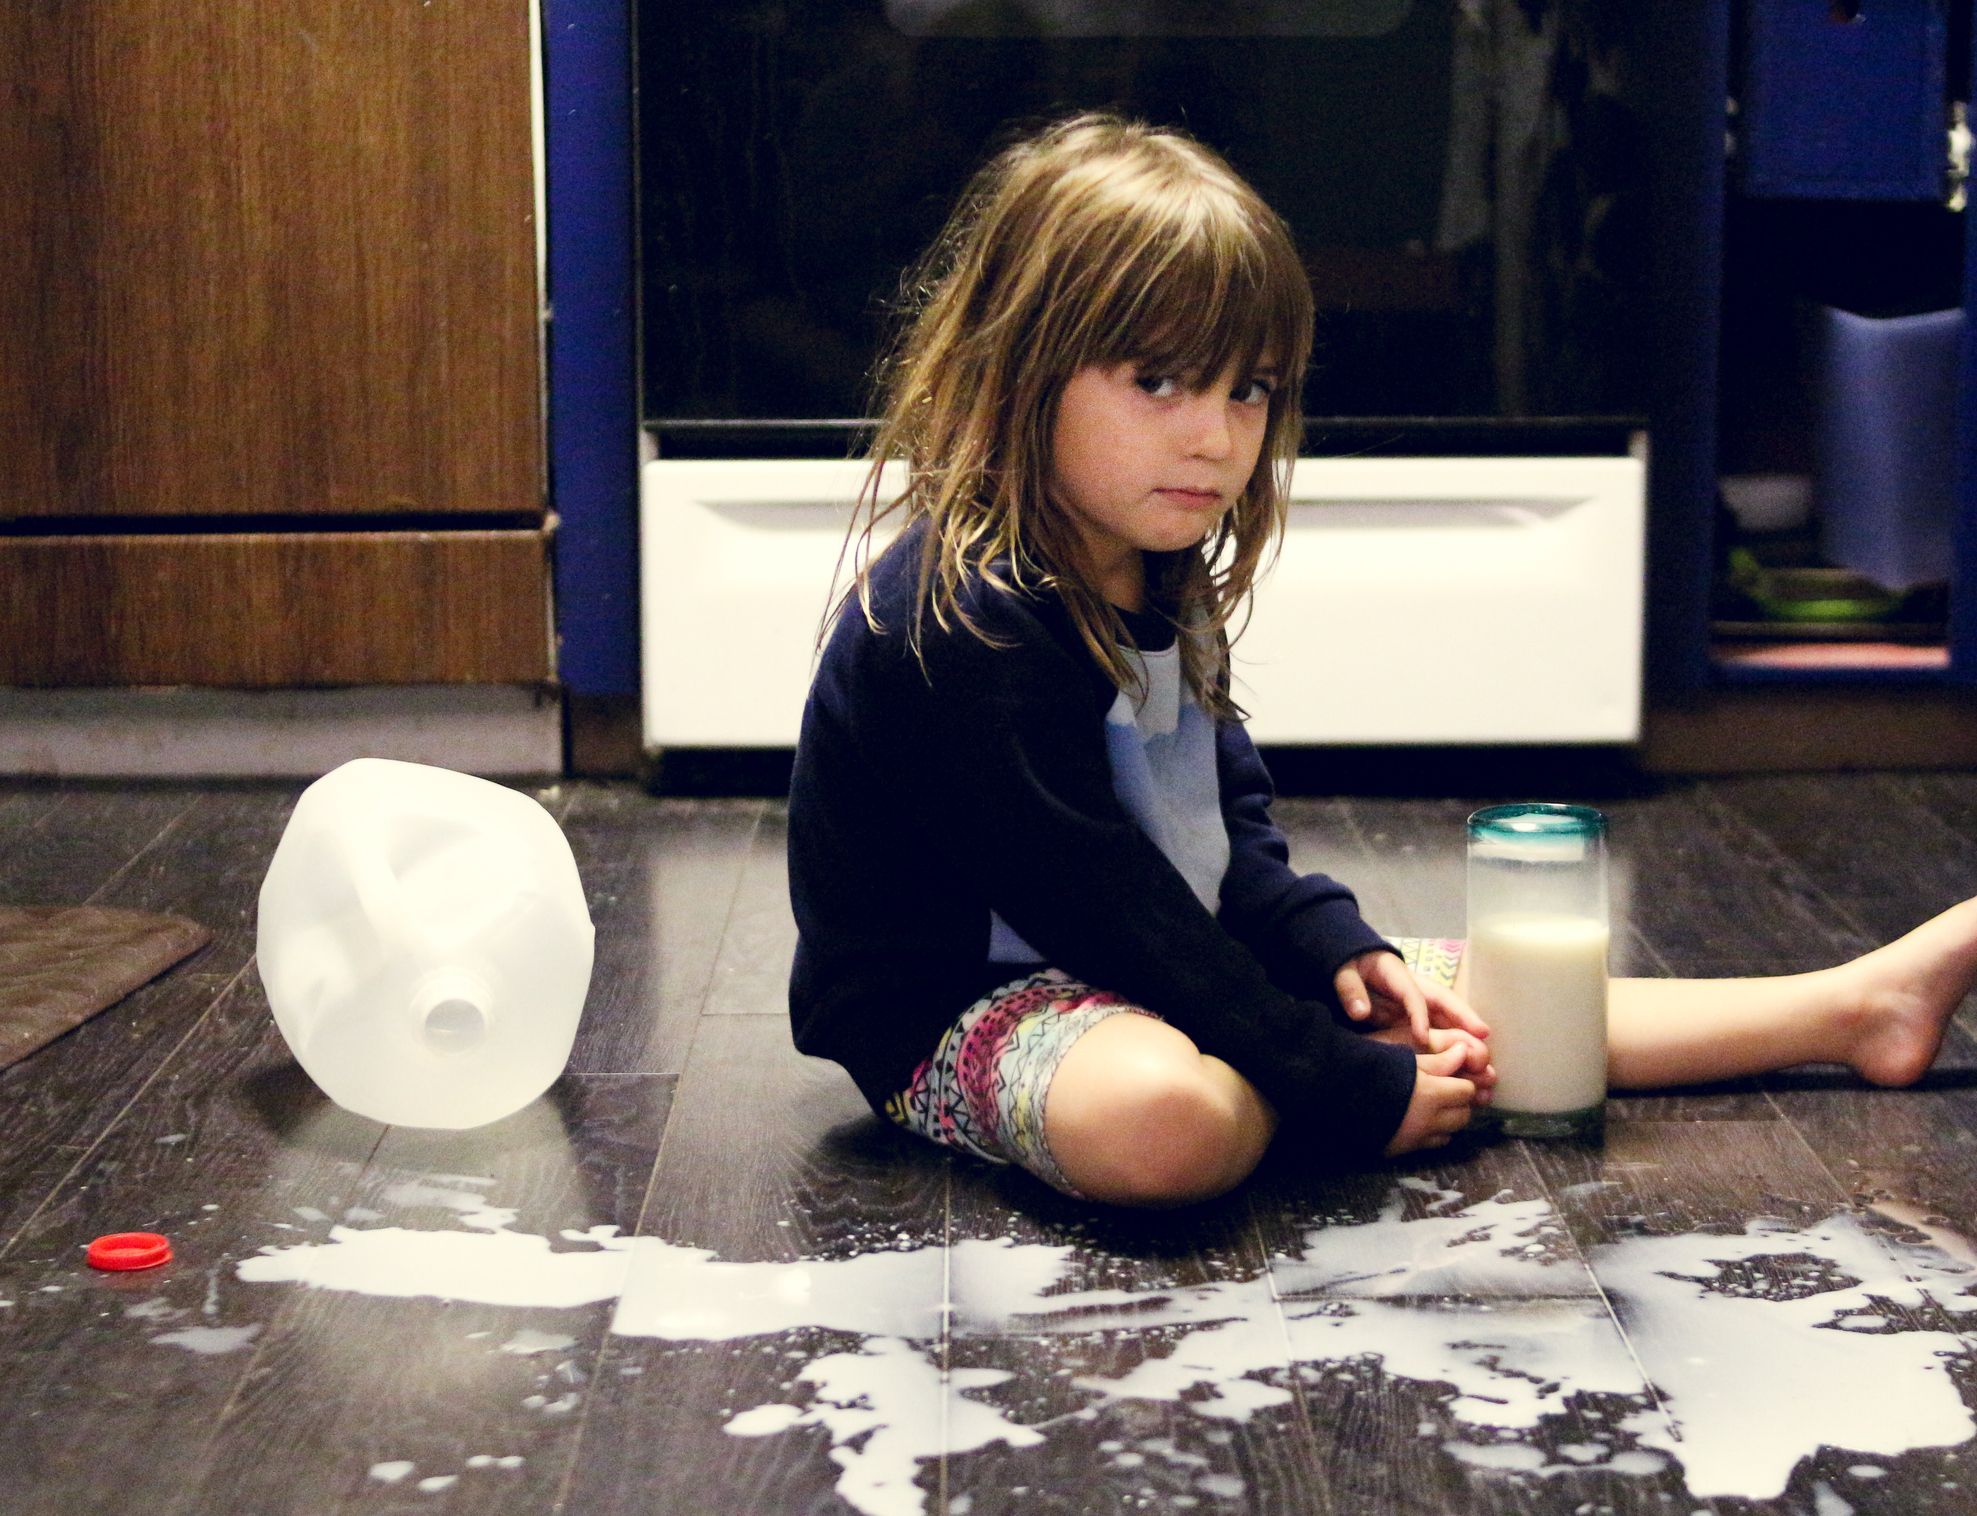 A preschooler sitting on the kitchen floor with a gallon of spilt milk: a mess or a teaching moment?